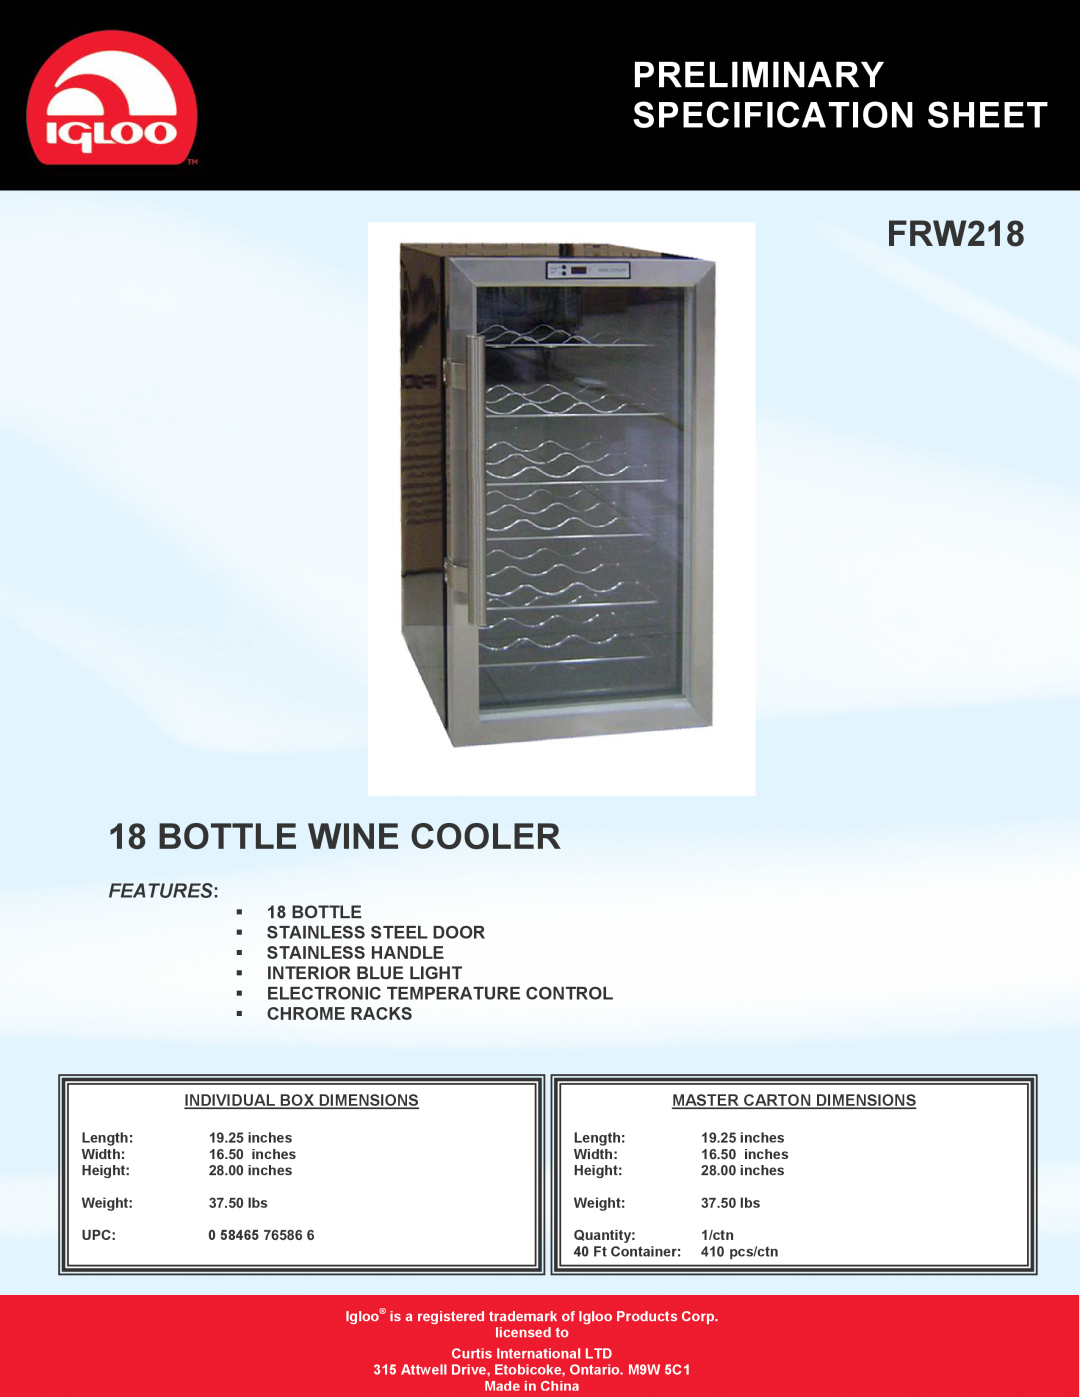 Igloo specifications Preliminary Specification Sheet, FRW218 18 BOTTLE WINE COOLER, Features, Individual Box Dimensions 